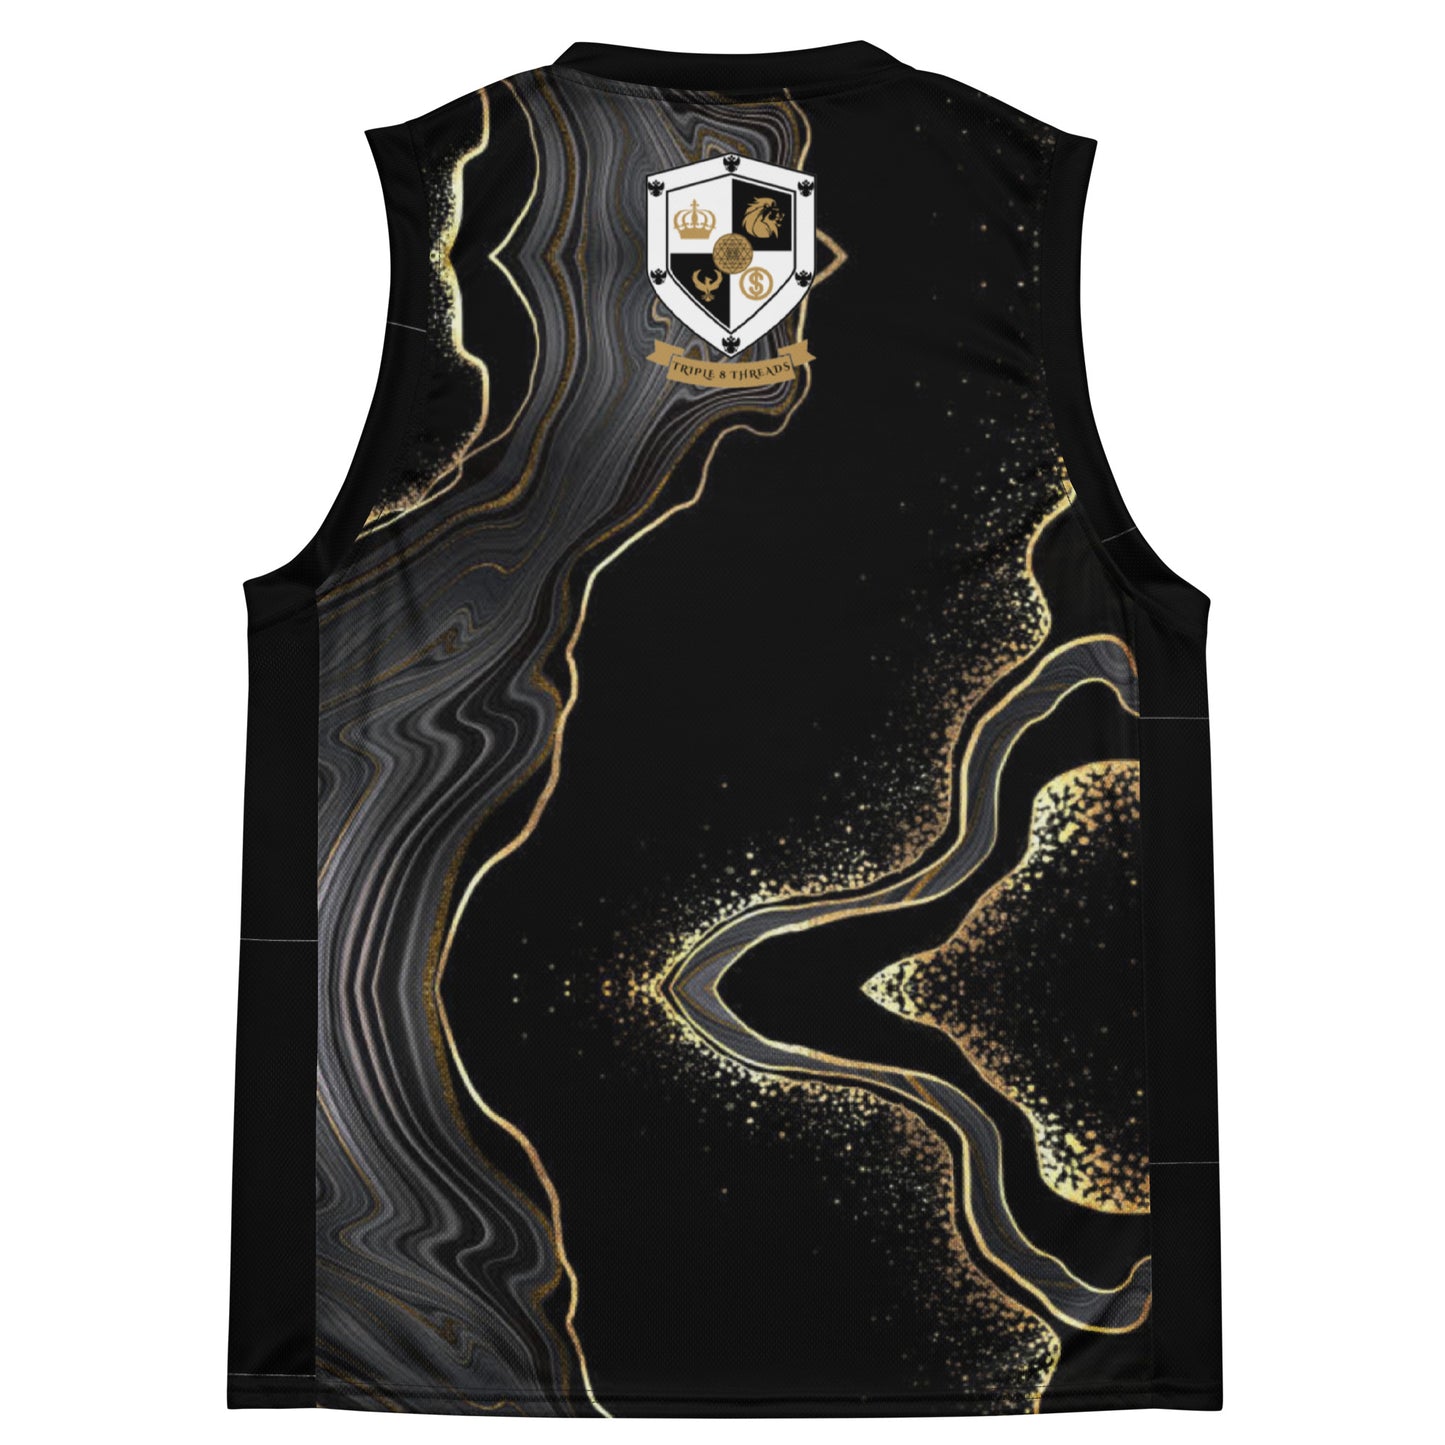 8xquiZit Collection - Deep Black N Gold Marble Unisex Basketball Jersey